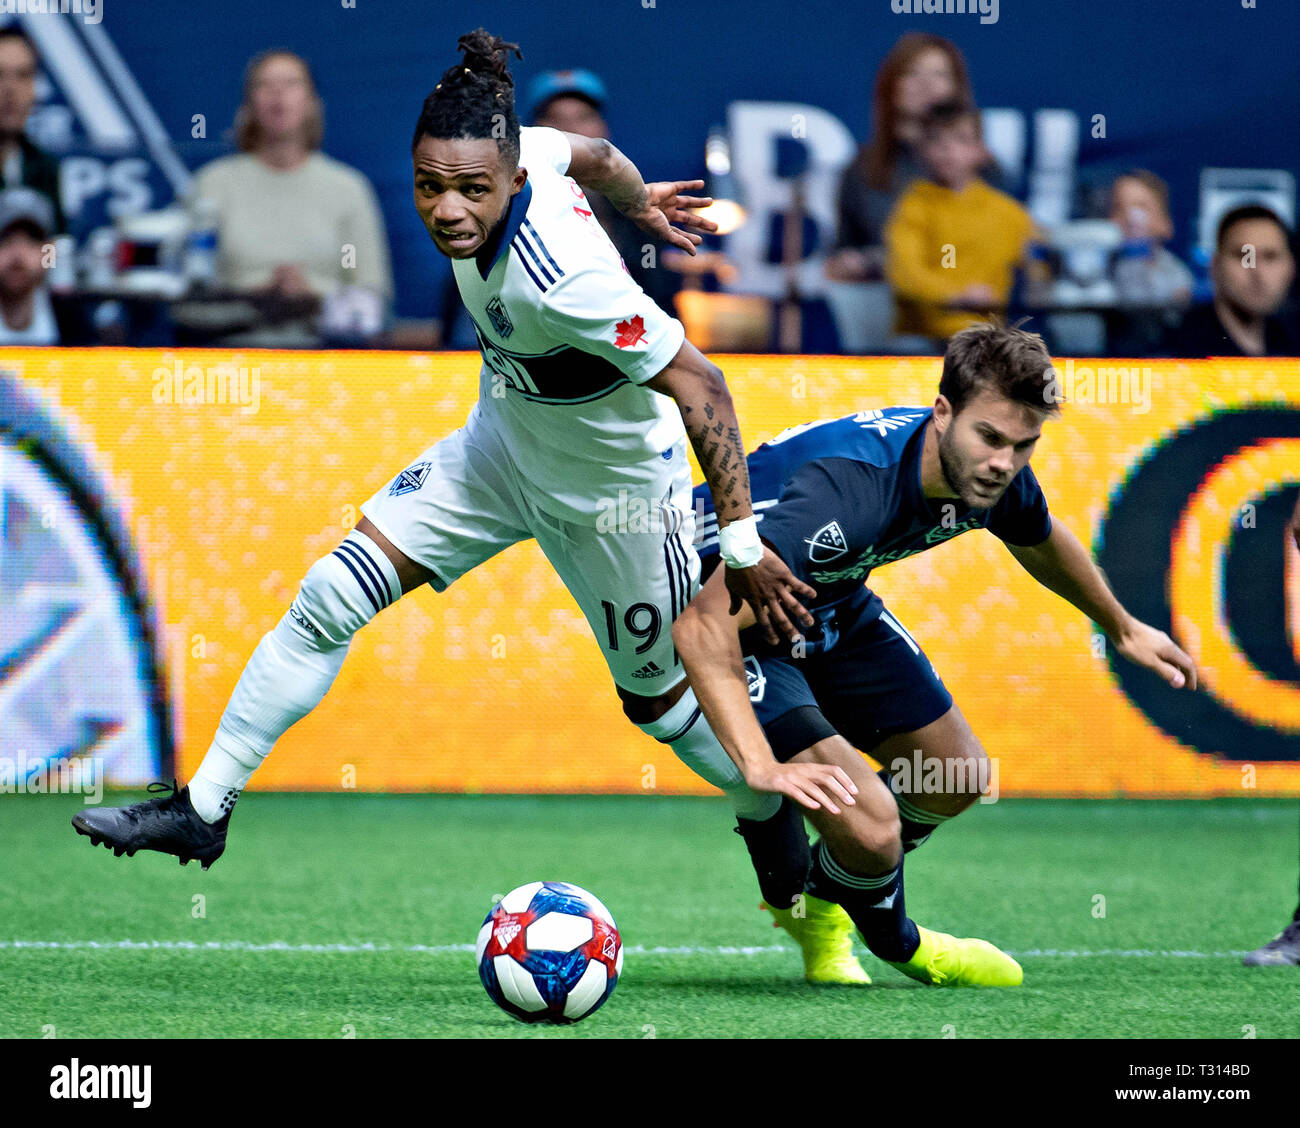 Vancouver, Canada. 5th Apr, 2019. LA Galaxy's Jorgen Skjelvik (R) vies with Vancouver Whitecaps' Lass Bangoura during an MLS soccer match between Vancouver Whitecaps and LA Galaxy at BC Place in Vancouver, Canada, April 5, 2019. LA Galaxy won 2-0. Credit: Andrew Soong/Xinhua/Alamy Live News Stock Photo